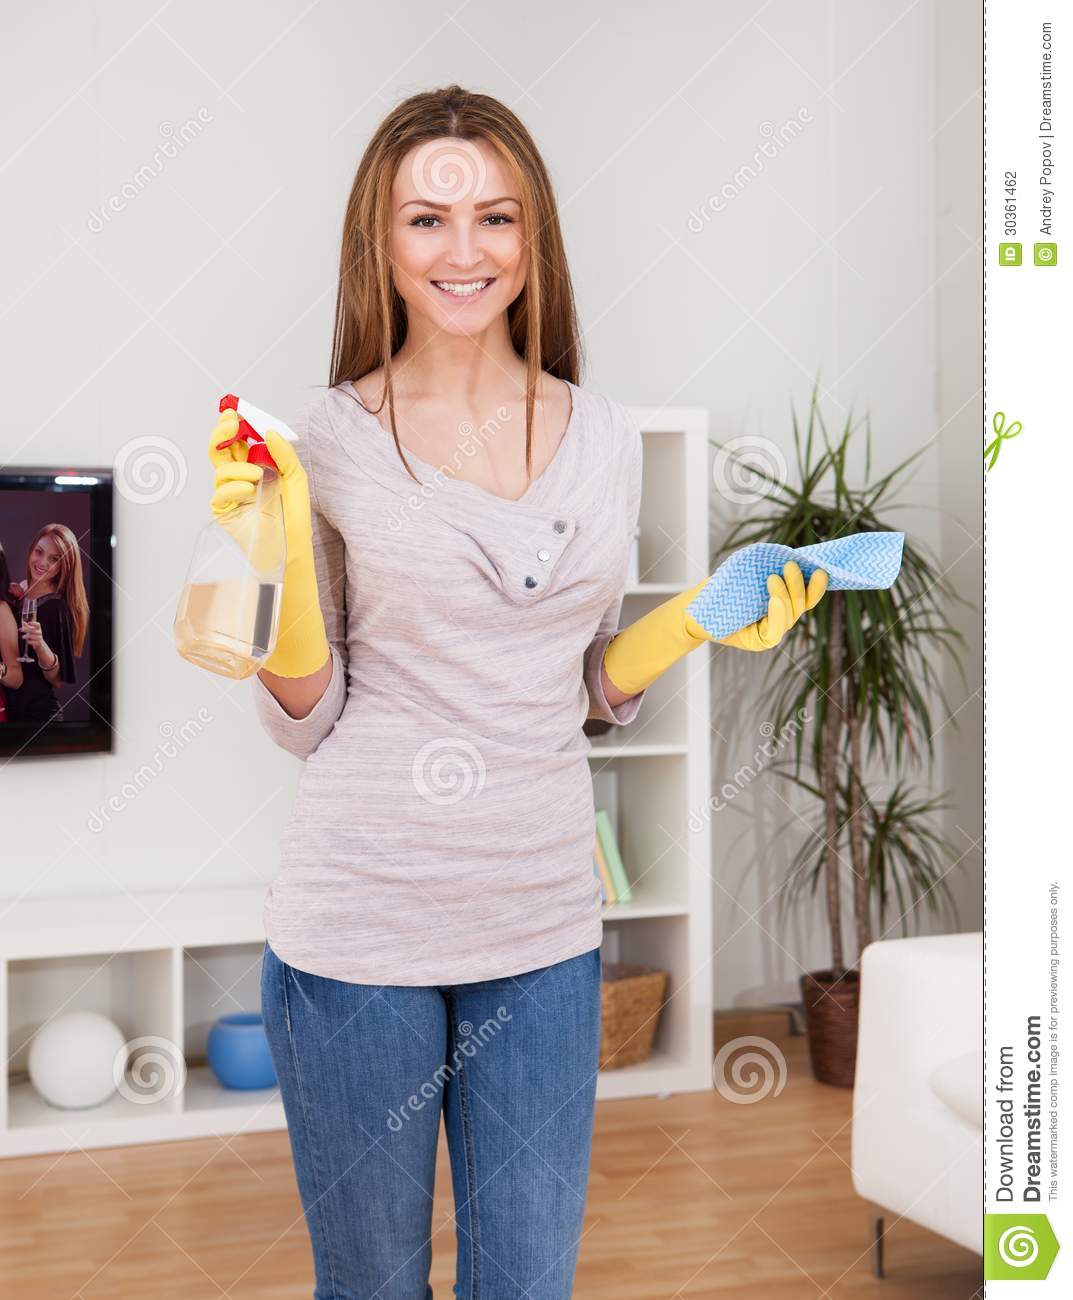 Portrait Of Young Woman Doing Household Chores